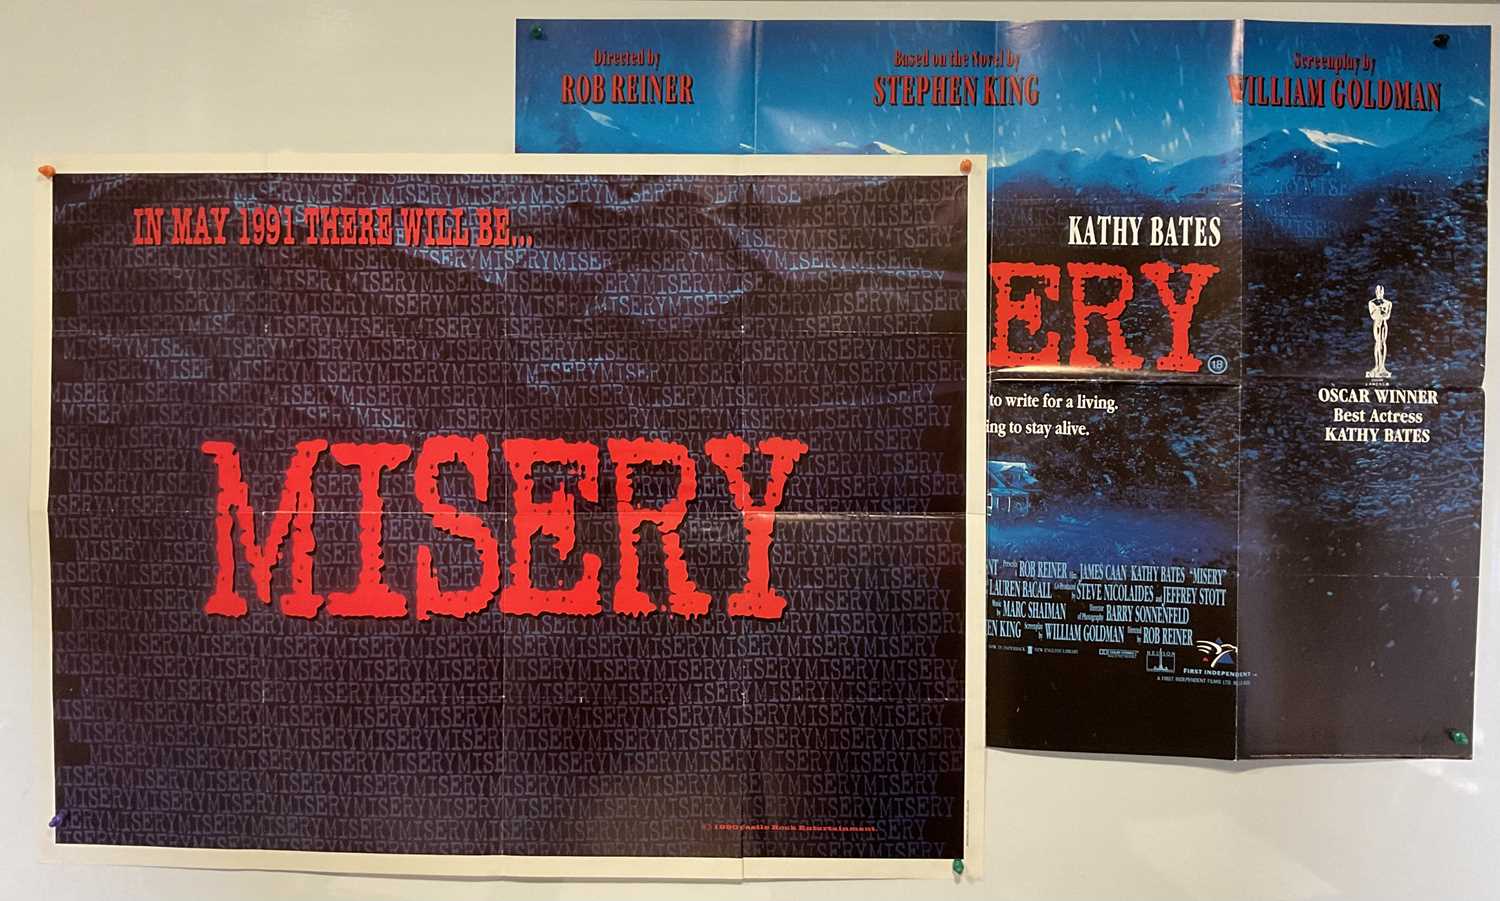 MISERY (1990) A UK Quad teaser film poster and standard UK Quad poster for the classic horror